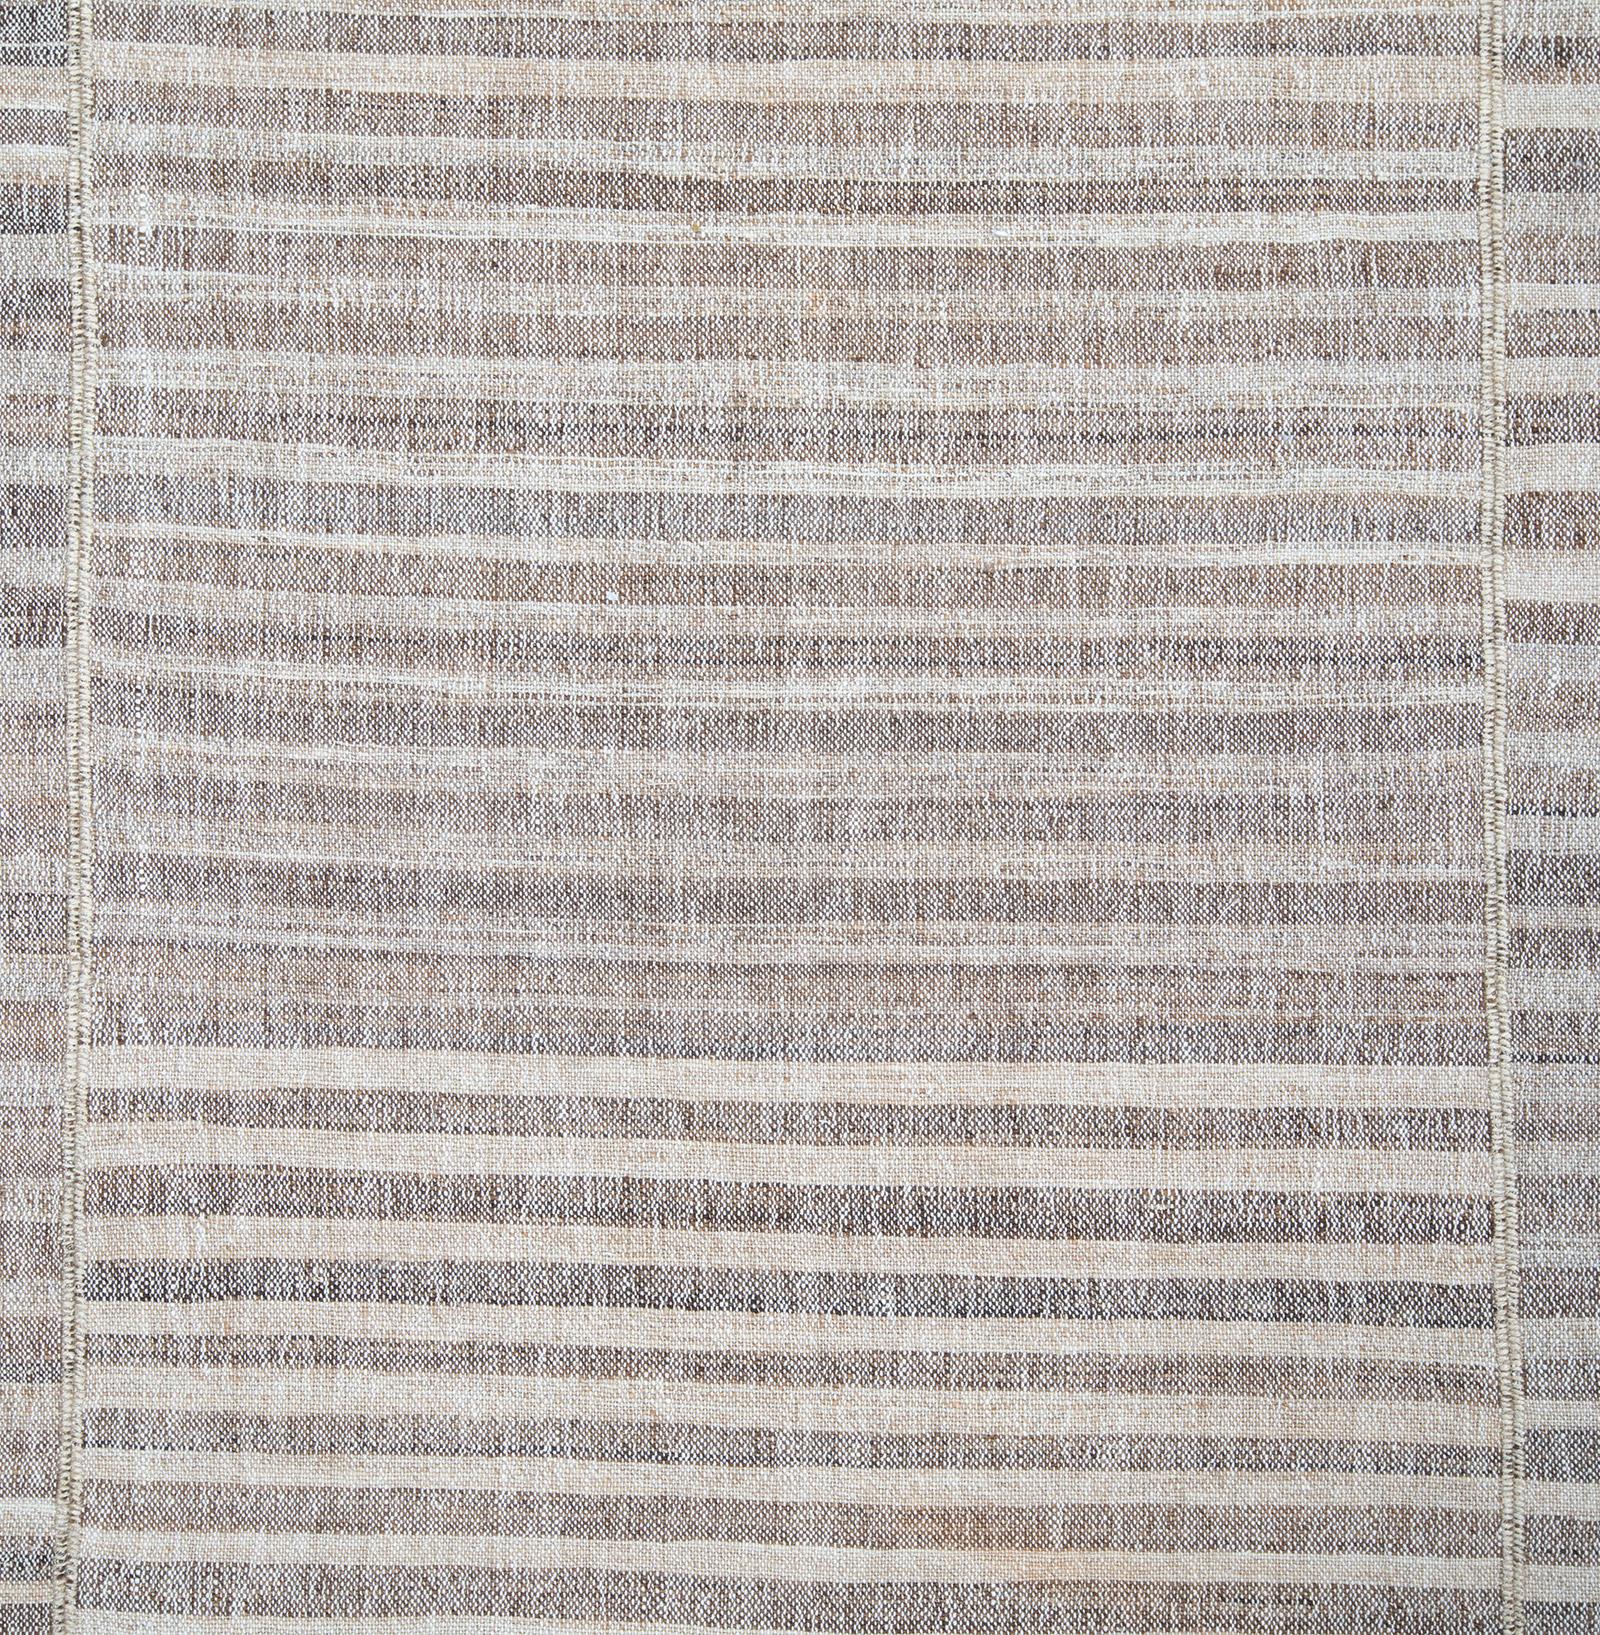 Hand-Woven Fine Charming Vintage Flat-Weave Rug For Sale